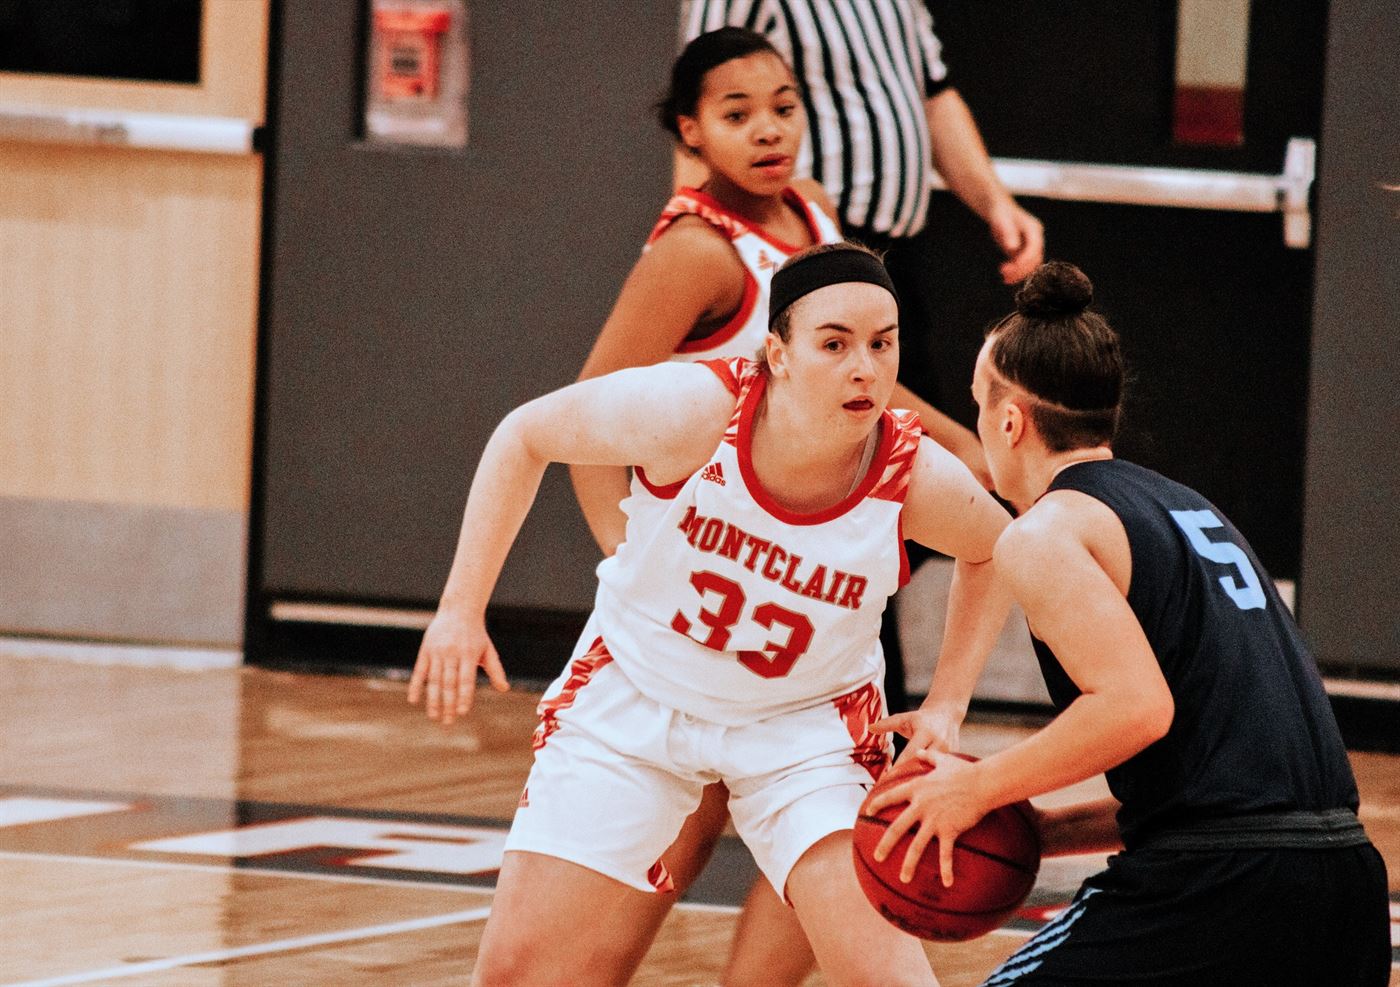 Red Hawks junior forward Annie Walsh closely defends a Kean player near the paint. Photo courtesy of Julia Radley